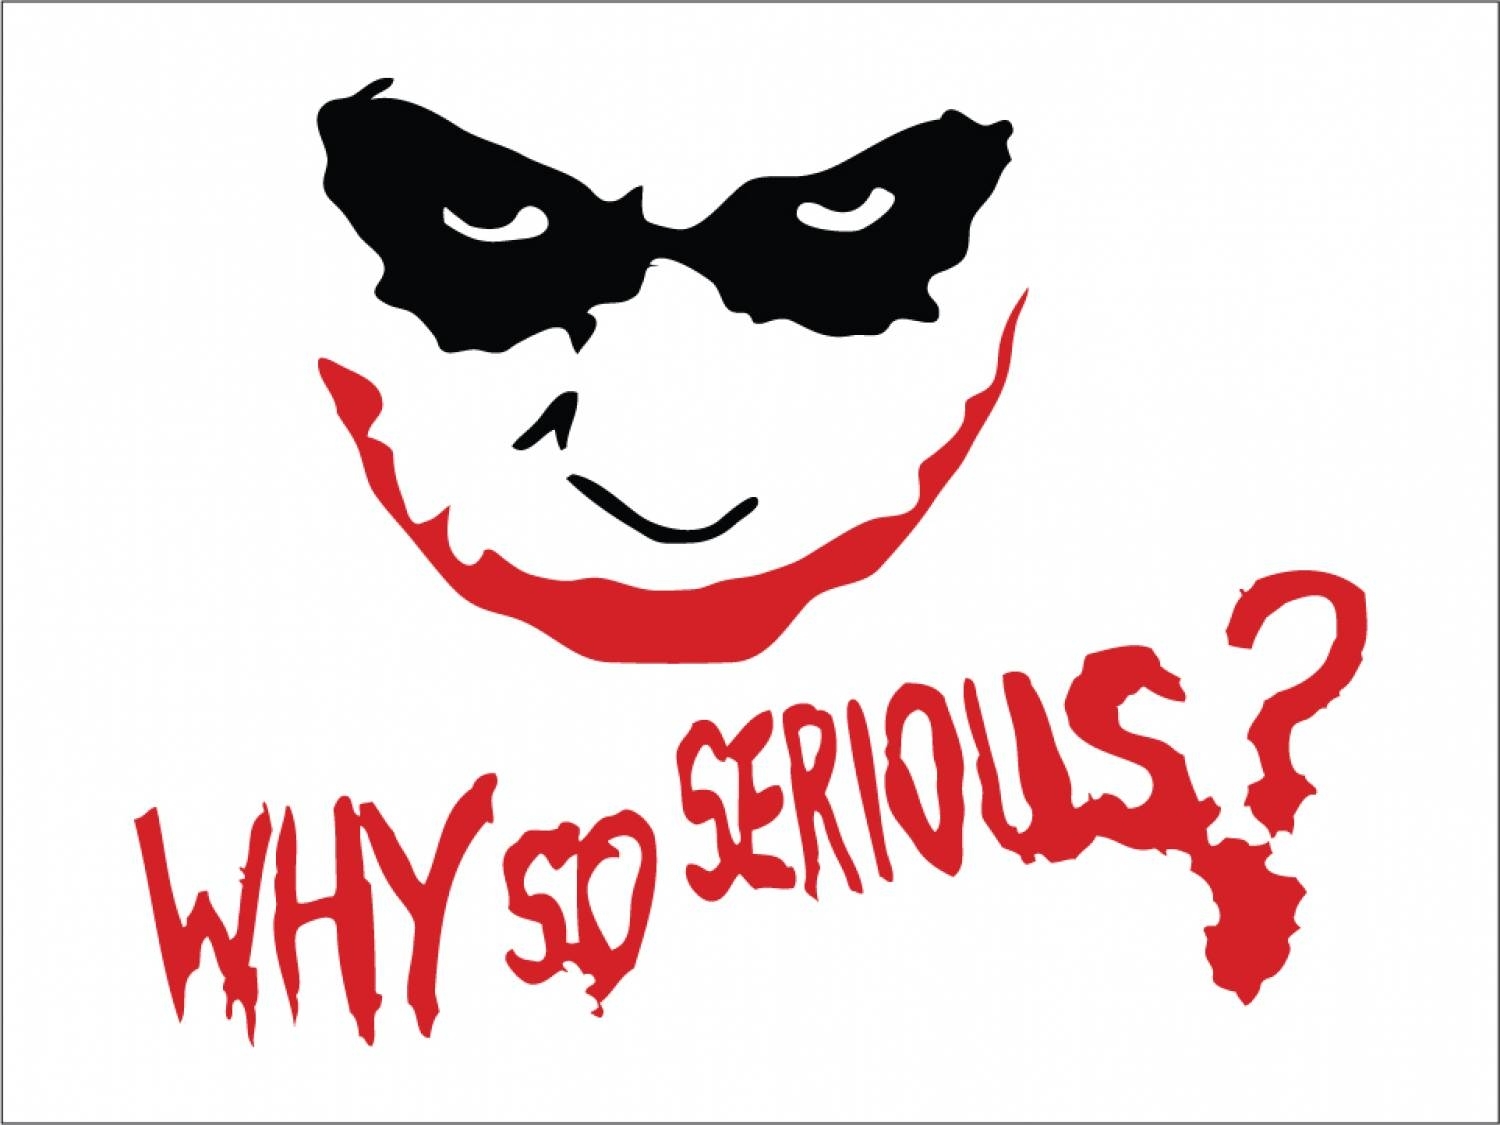 10 Best Why So Serious Logo FULL HD 1080p For PC Background